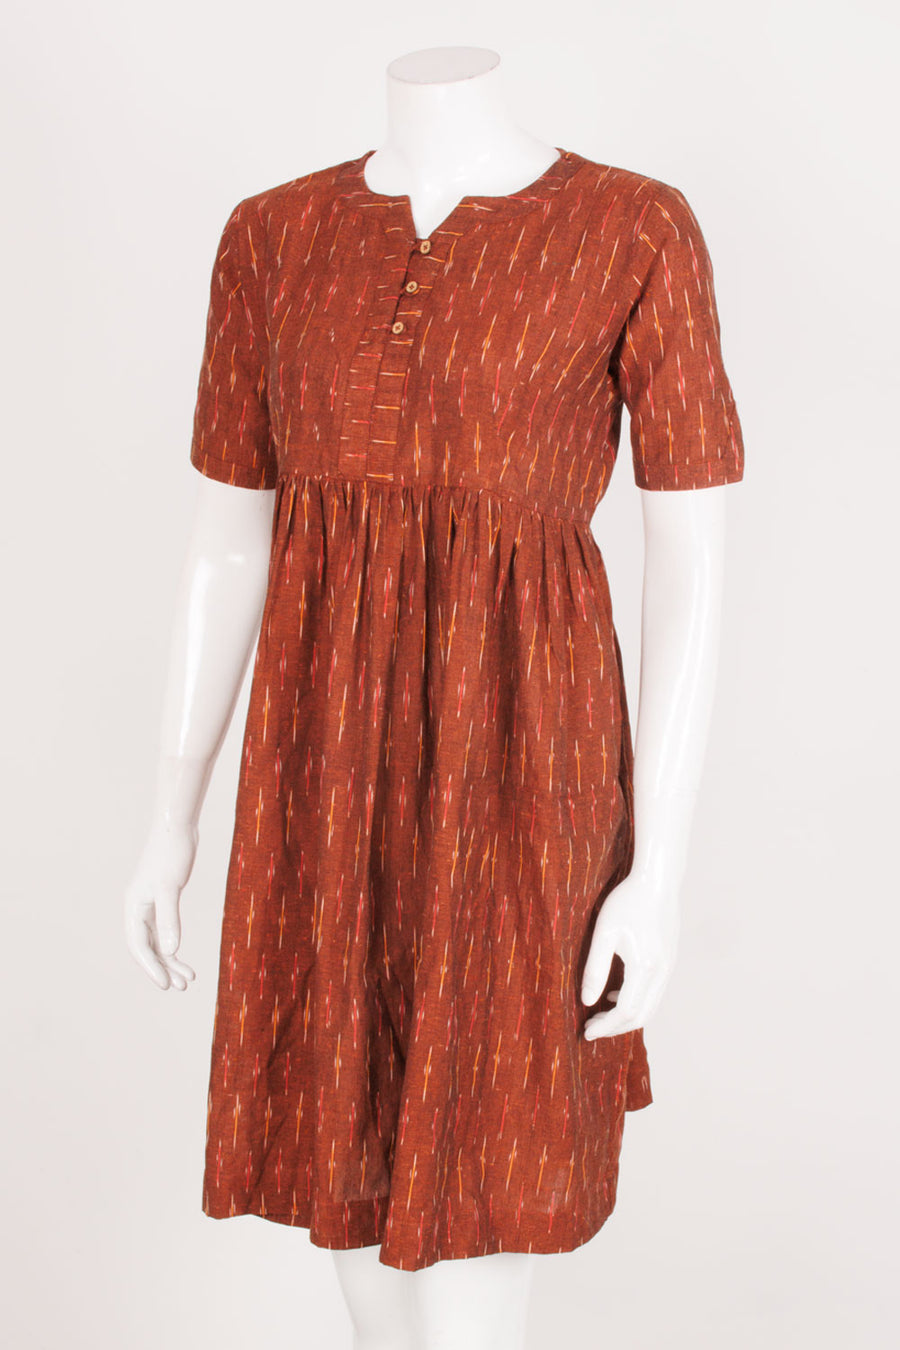 Handloom Ikat A-line Cotton dress with gathers, Elbow sleeve and with Pocket